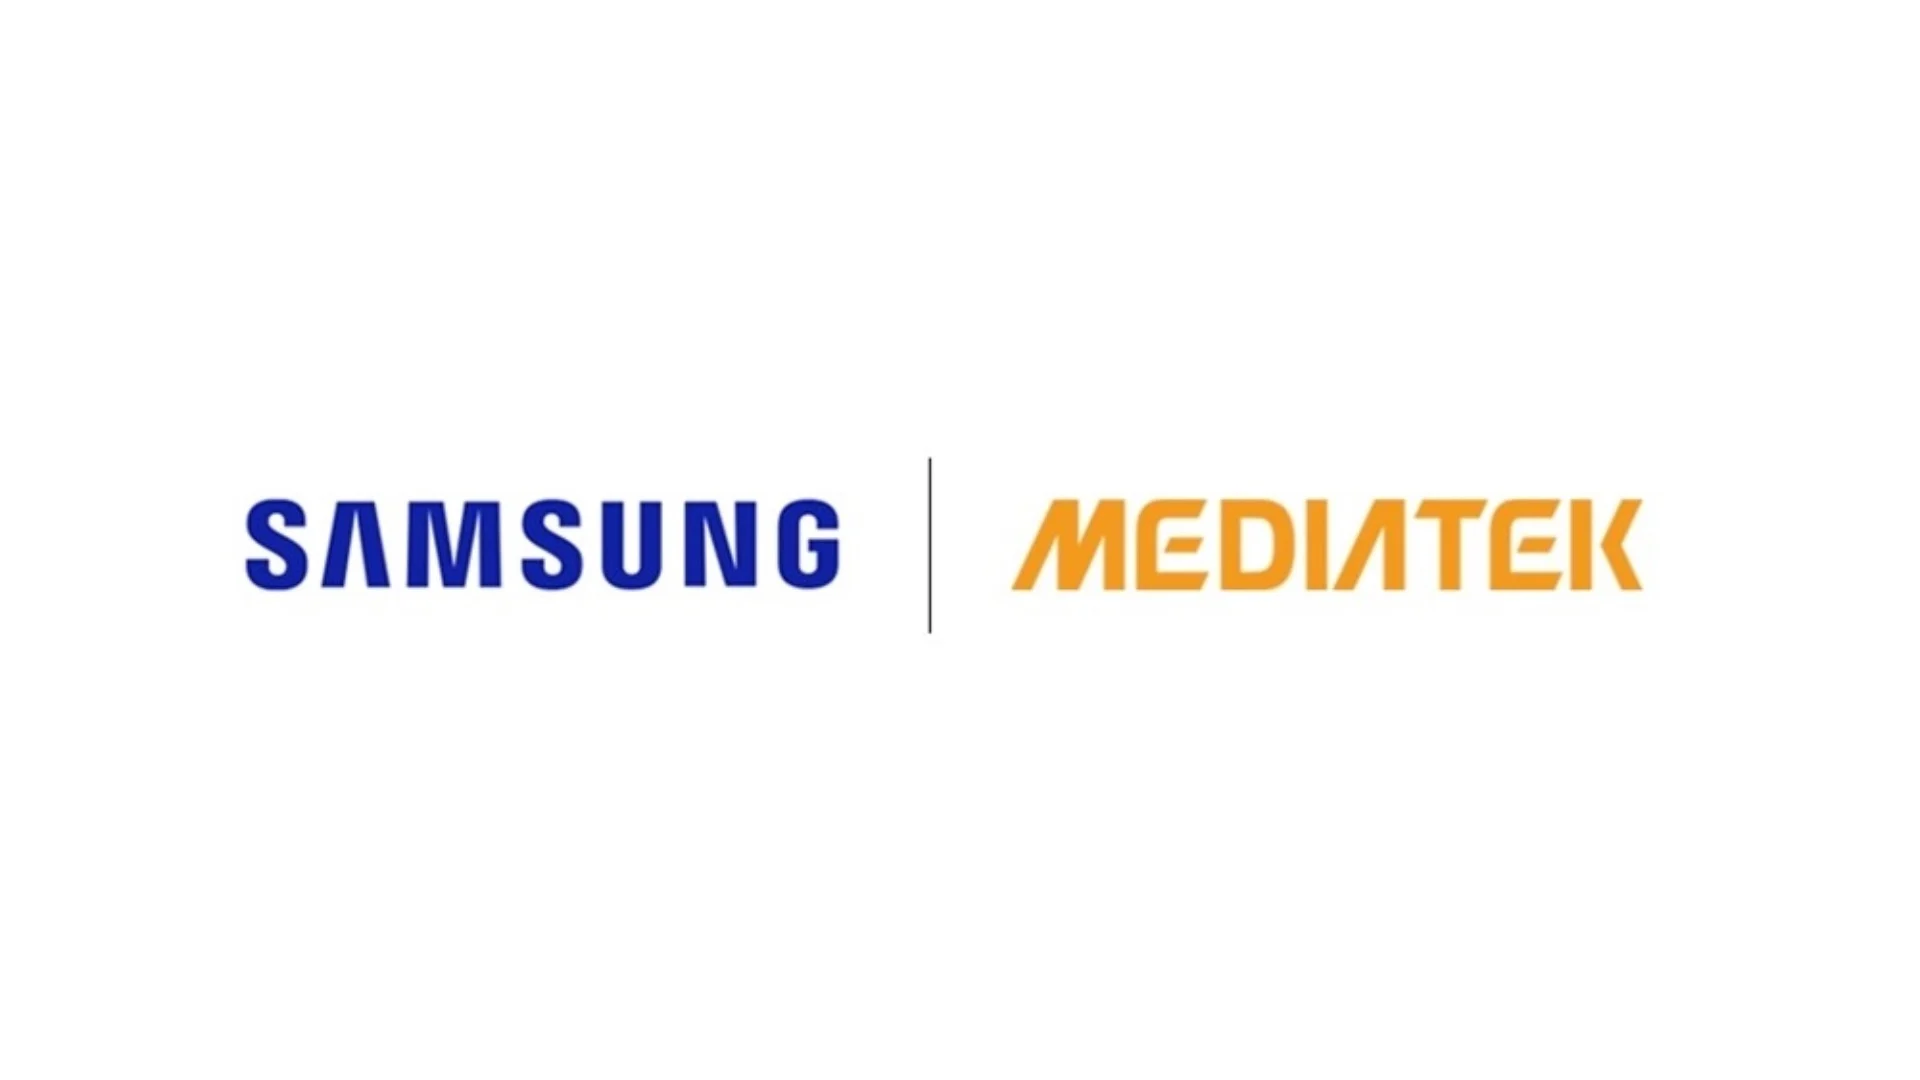 Samsung has certified the latest LPDDR5X DRAM memory chips for MediaTek's upcoming flagship chip